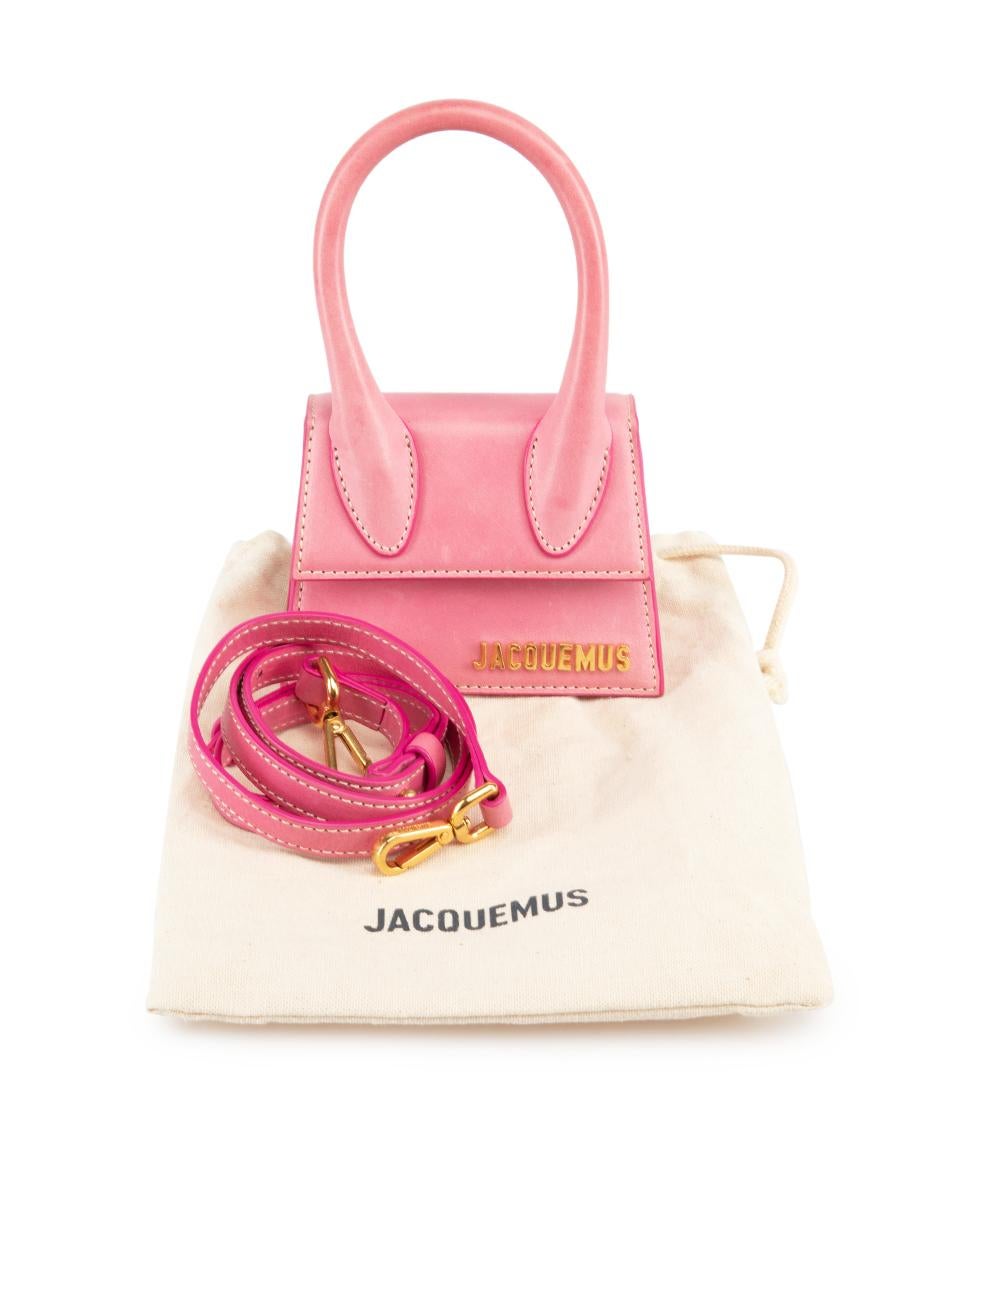 Jacquemus Pink Leather Le Chiquito Top Handle Bag For Sale 2